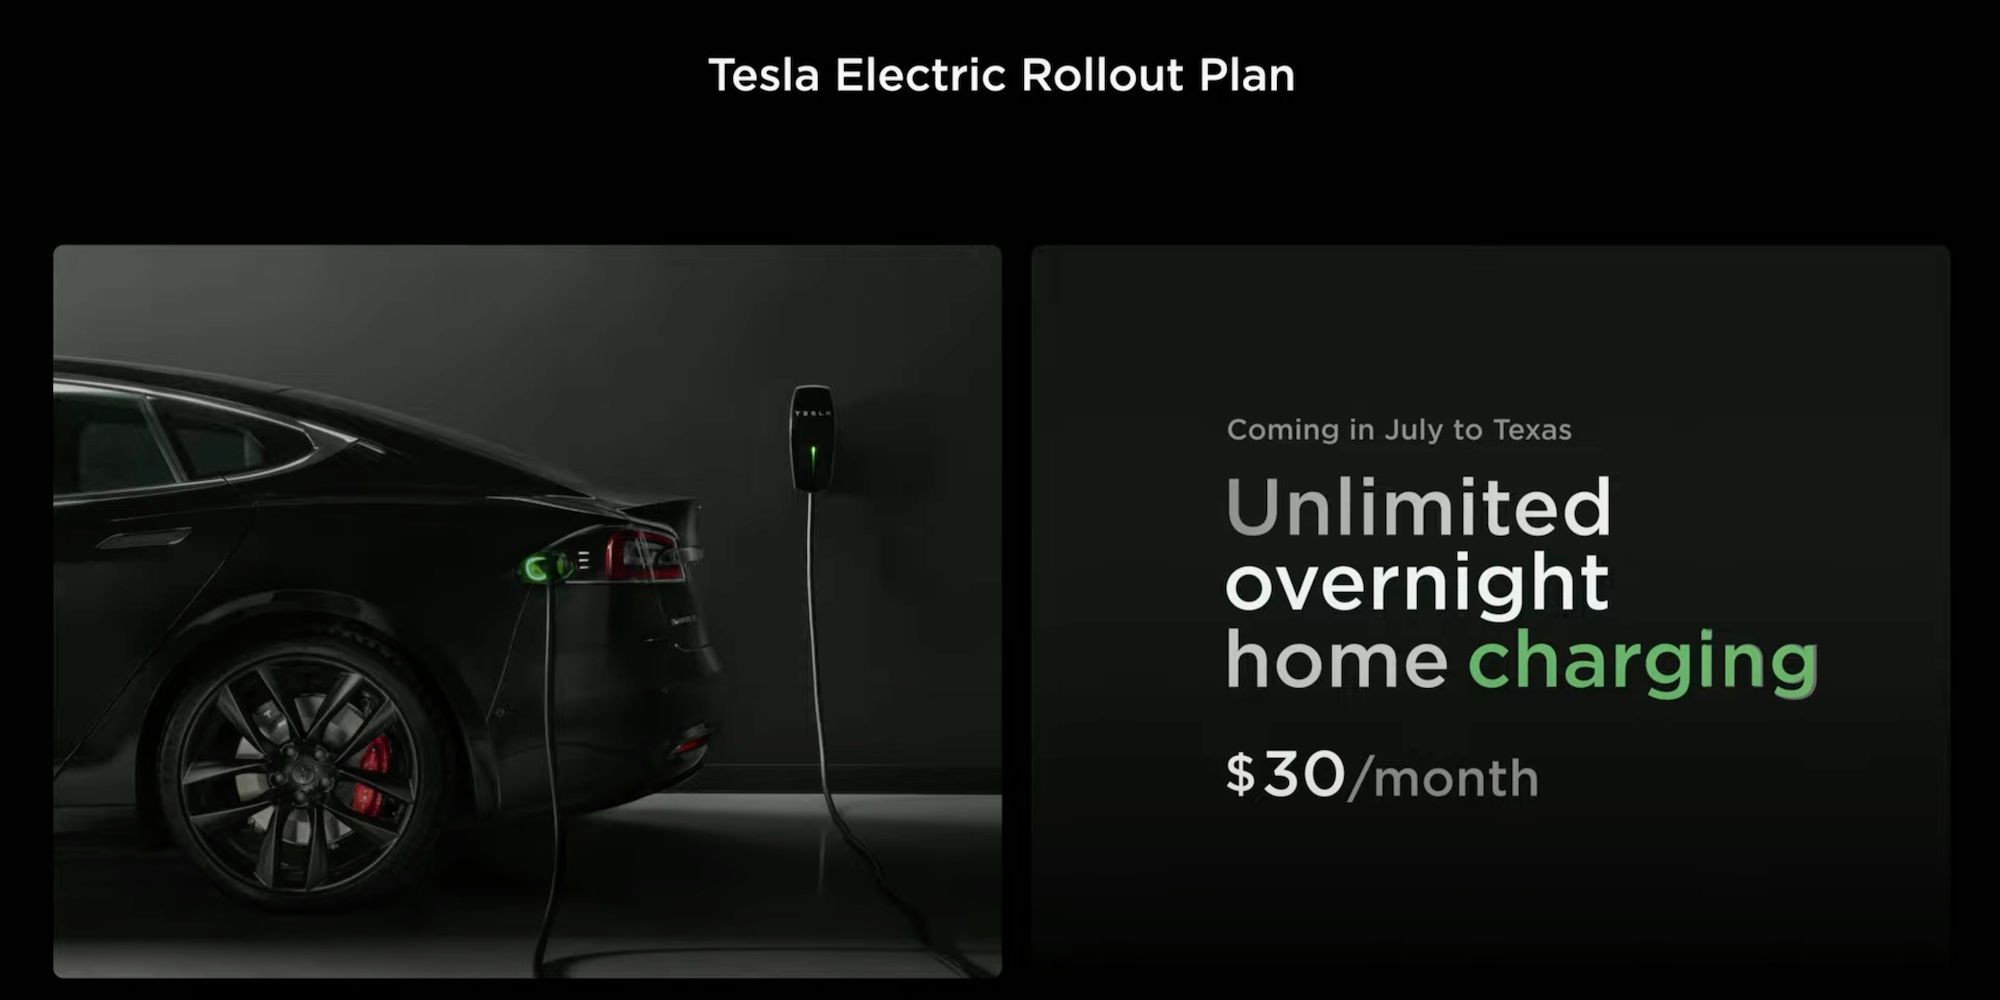 Tesla's Overnight Unllimited Home Charging plan